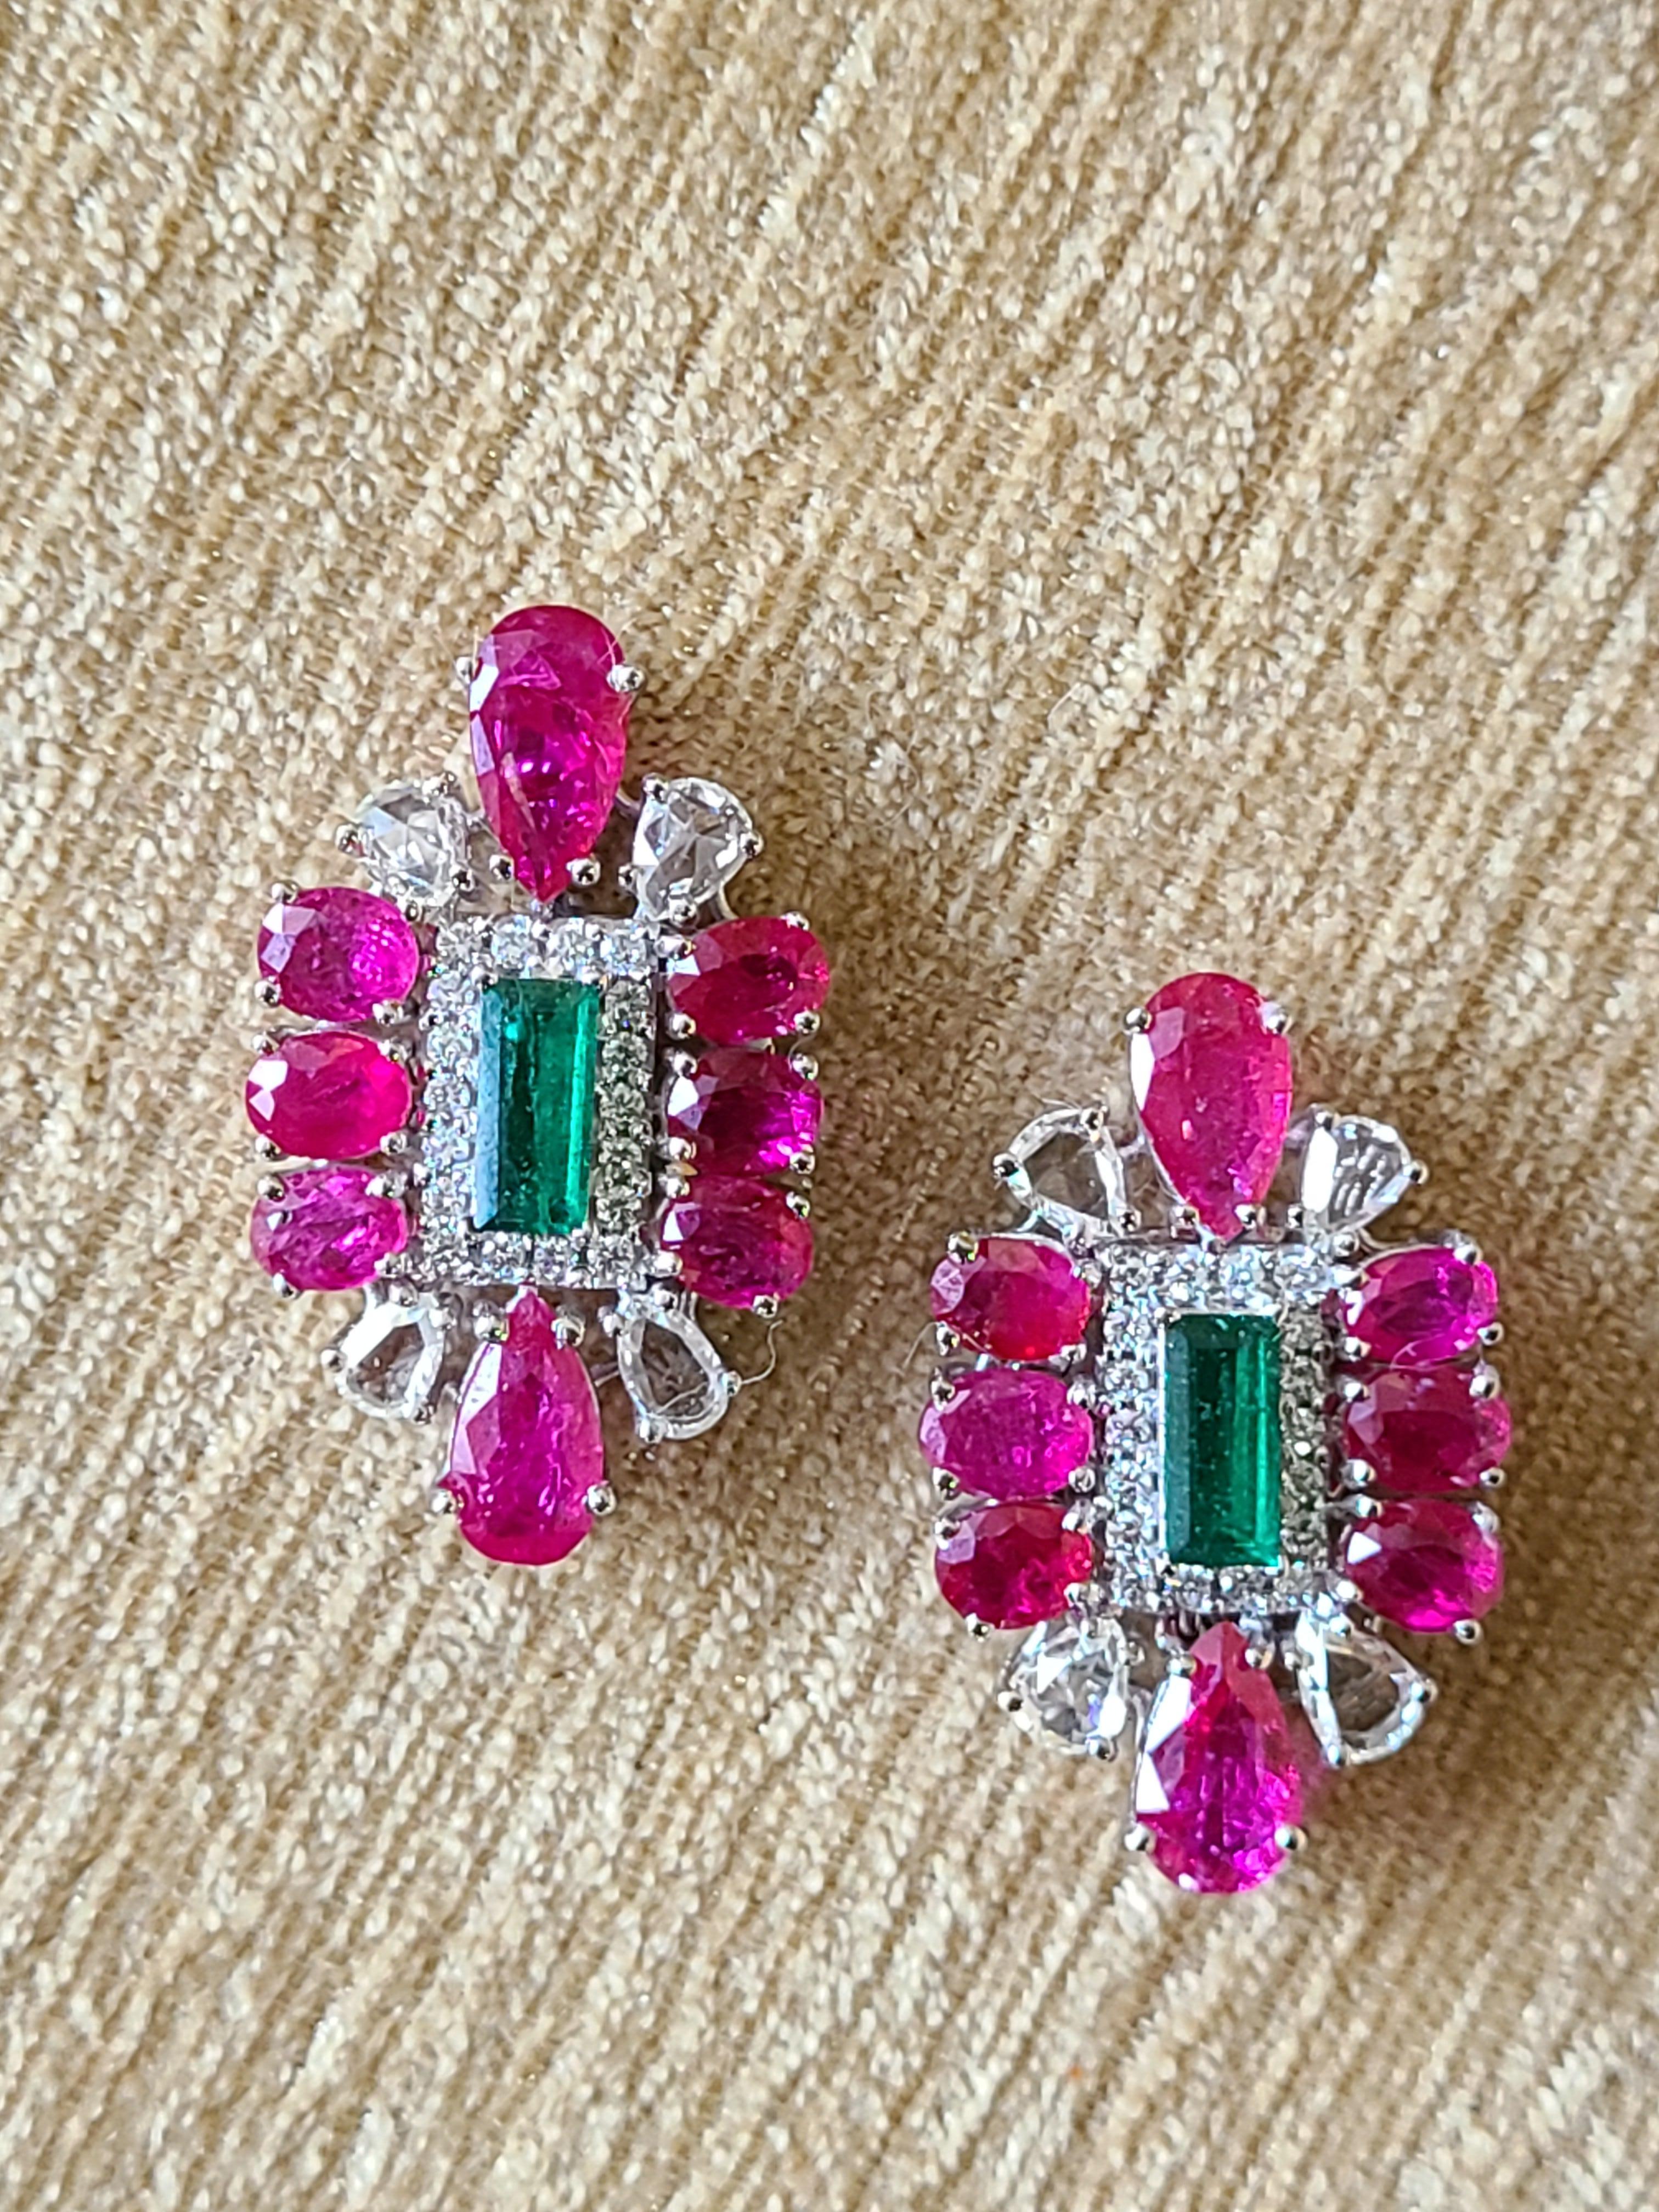 A gorgeous and modern ruby, emerald and diamond earrings convertible to studs in 18k white gold. The emerald weight is .91 carats and natural ruby weight is 5.1 carats. The diamond weight is 1.52 carats and net gold weight is 9.664 and earrings